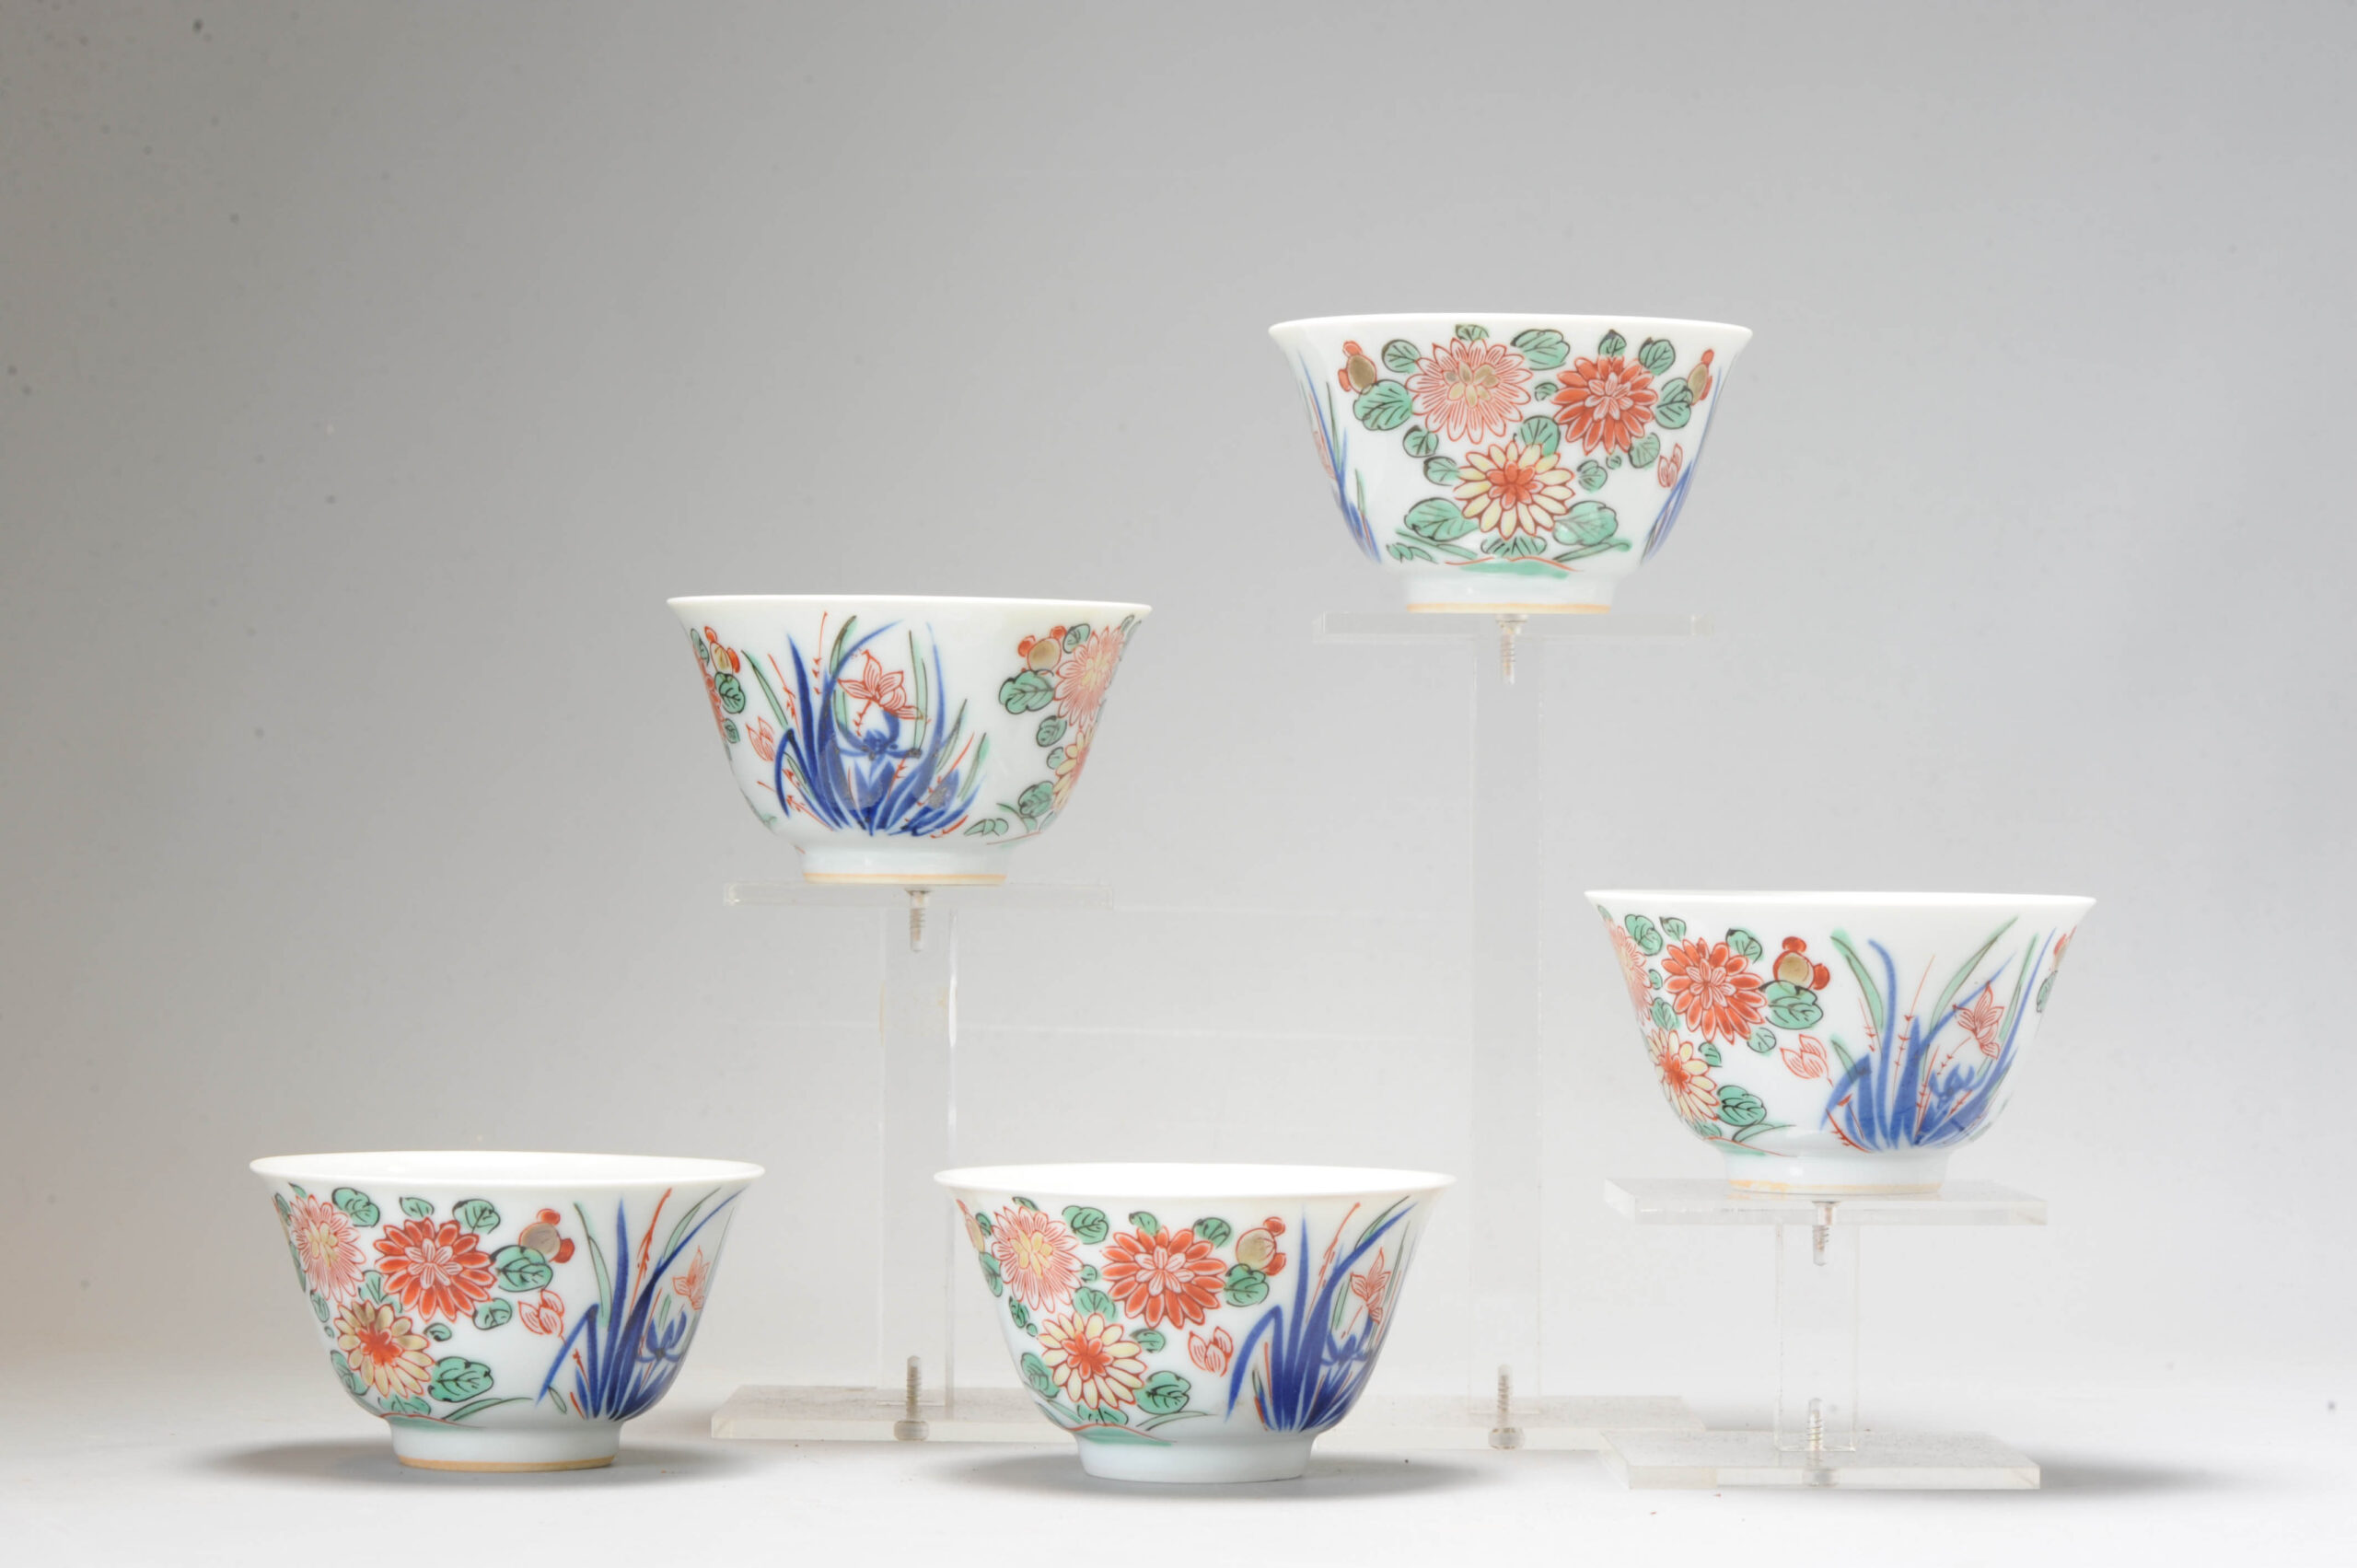 Antique 18/19th c Japanese Porcelain Teabowls with Flowers and base mark